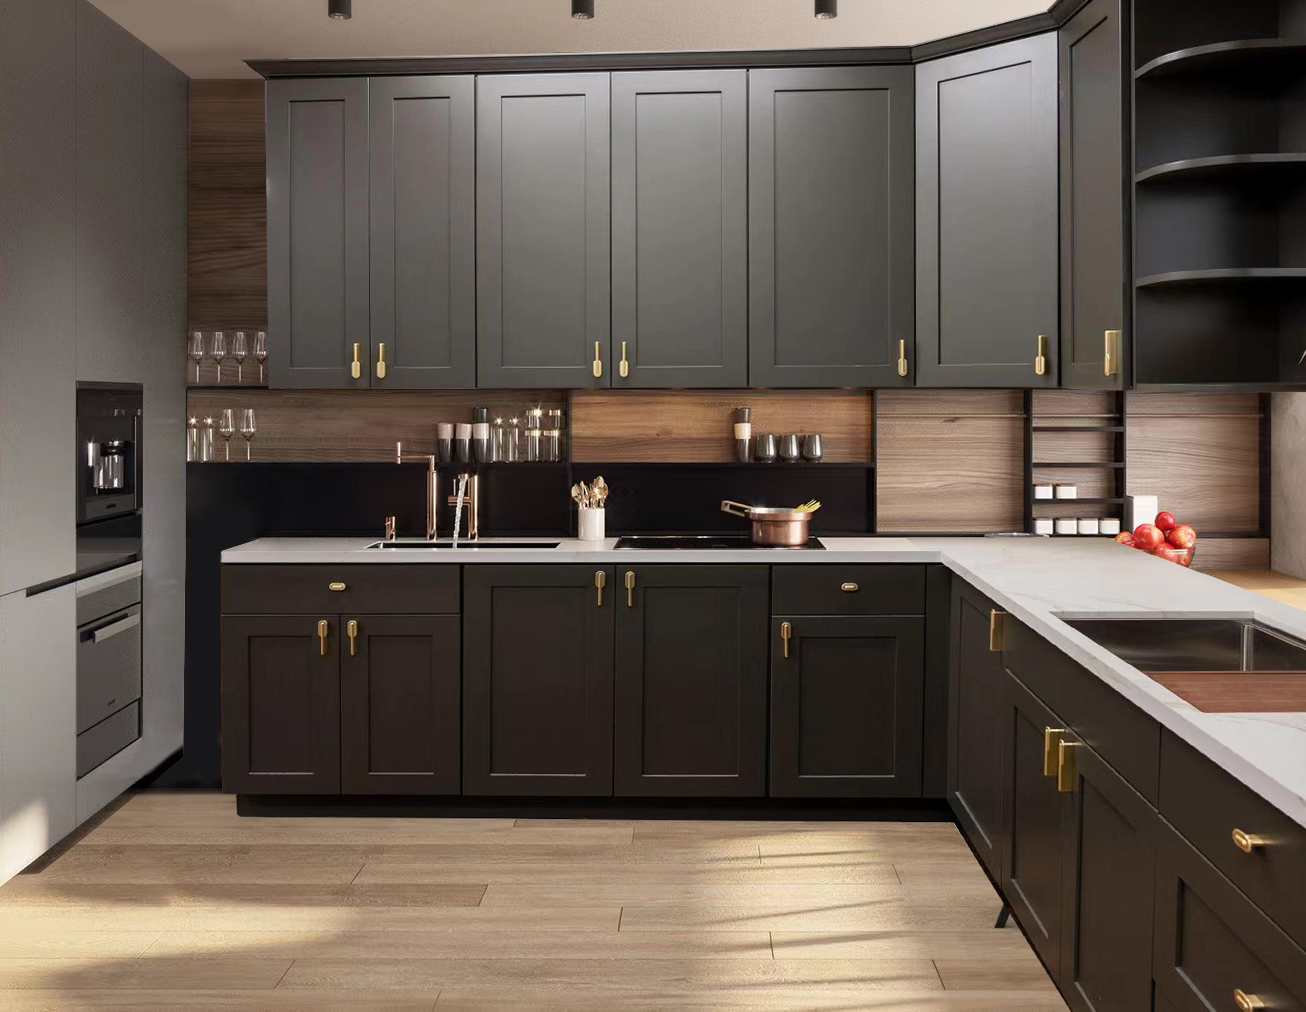 Kitchen Cabinets - East Star Building Supply